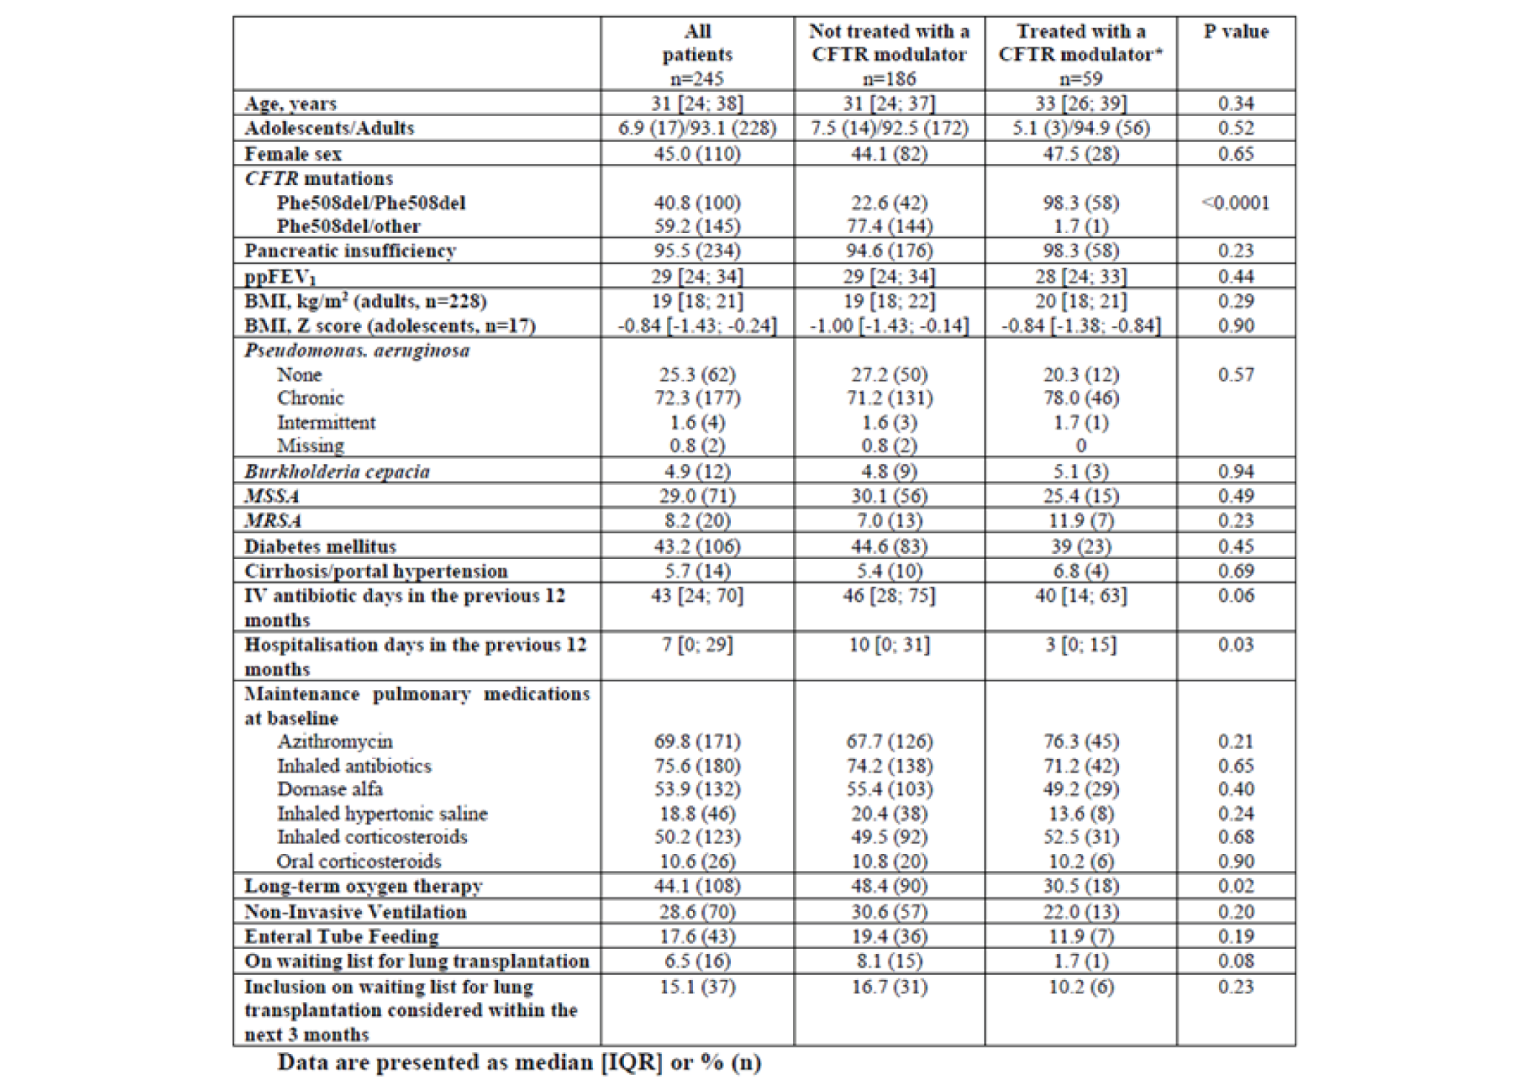 Baseline characteristics for patients in the French Cohort Study. Characteristics are shown for all patients (n = 245), patients who were not treated with a CFTR modulator (n = 186), and patients who were treated with a CFTR modulator (n = 59).